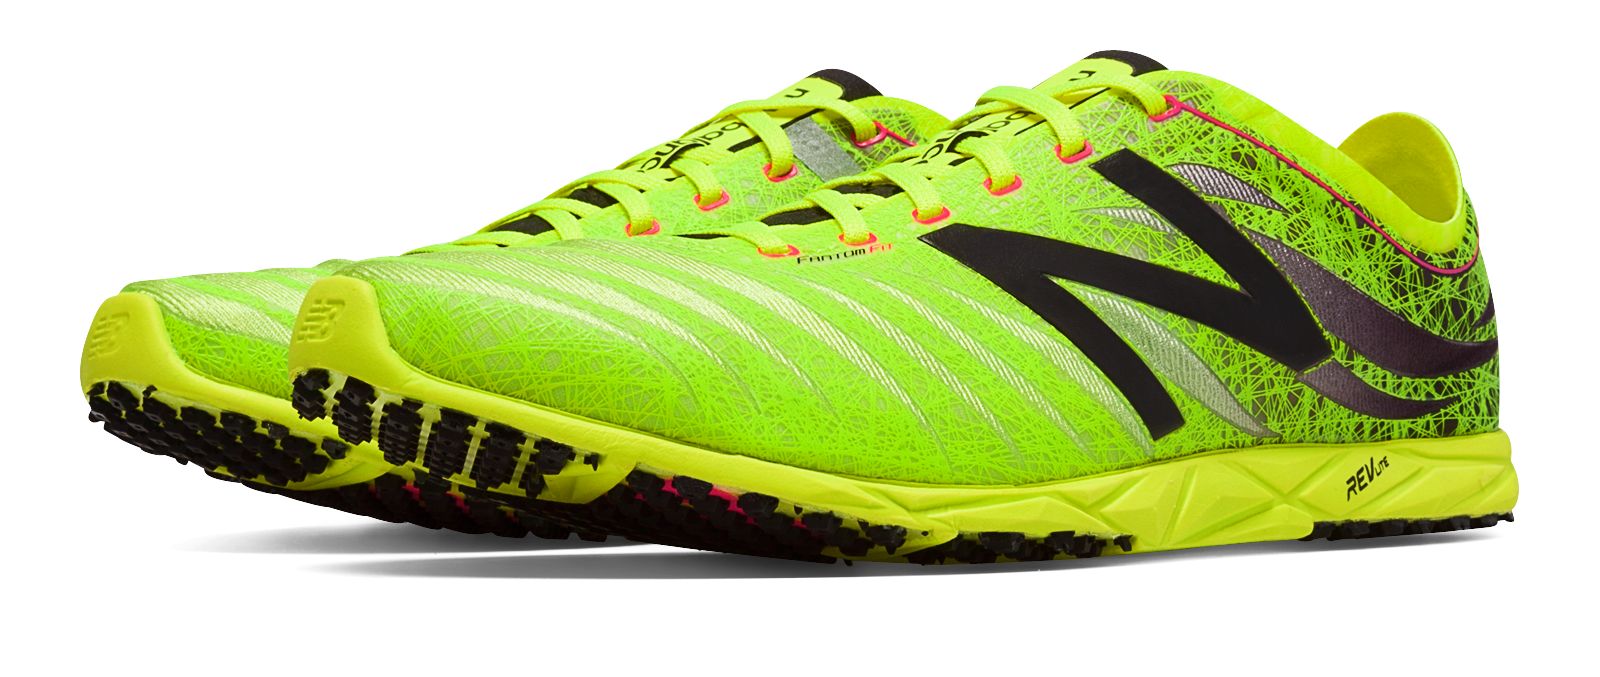 new balance spikeless track shoes